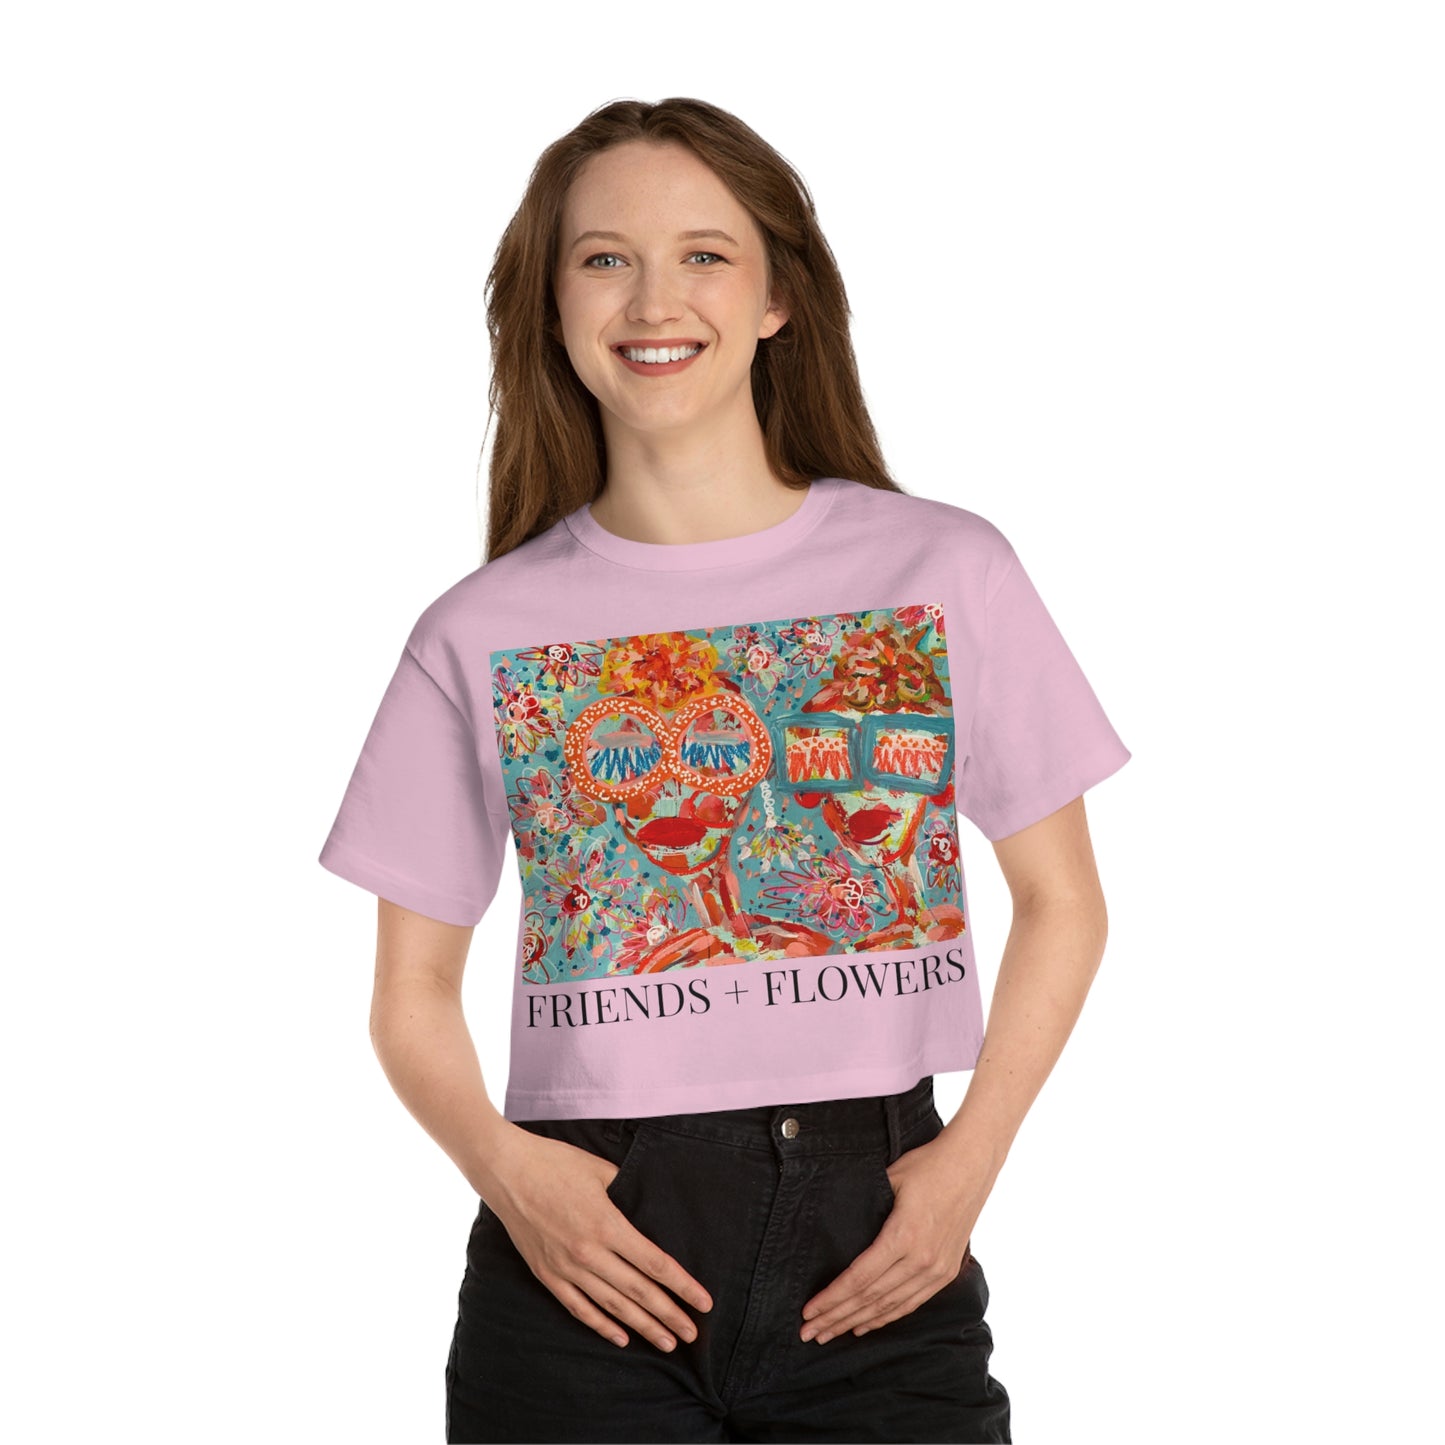 "FRIENDS + FLOWERS" Champion Women's Heritage Cropped T-Shirt